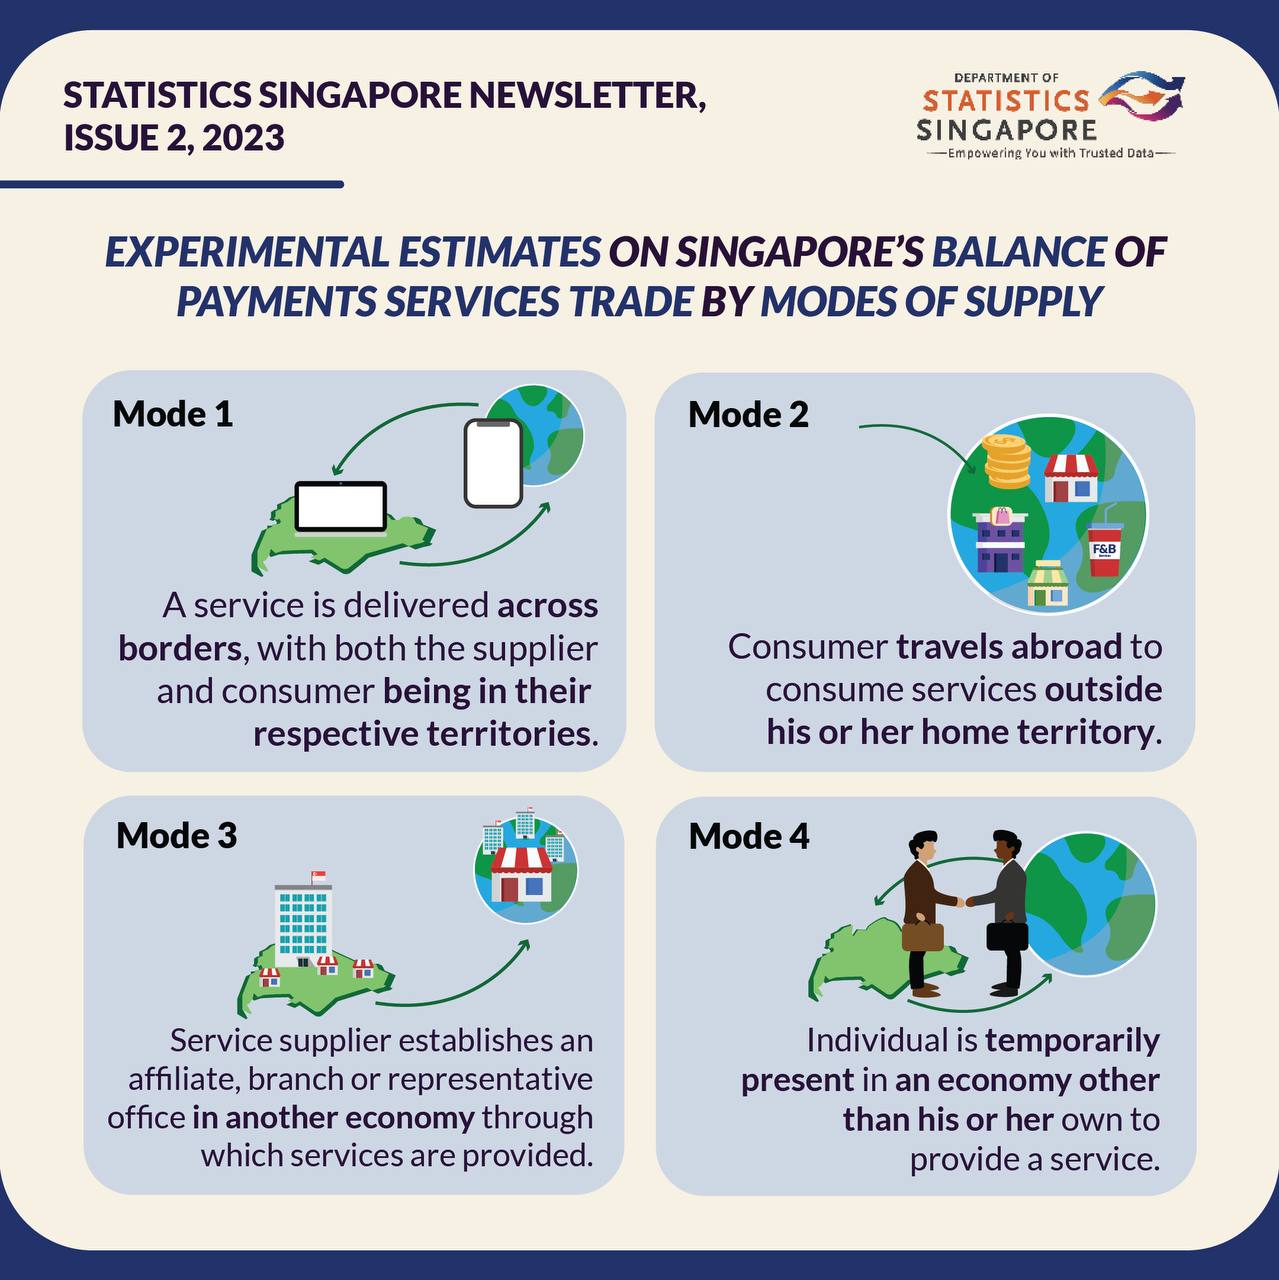 Experimental estimates on Singapore's Balance of Payments Services Trade by modes of Supply